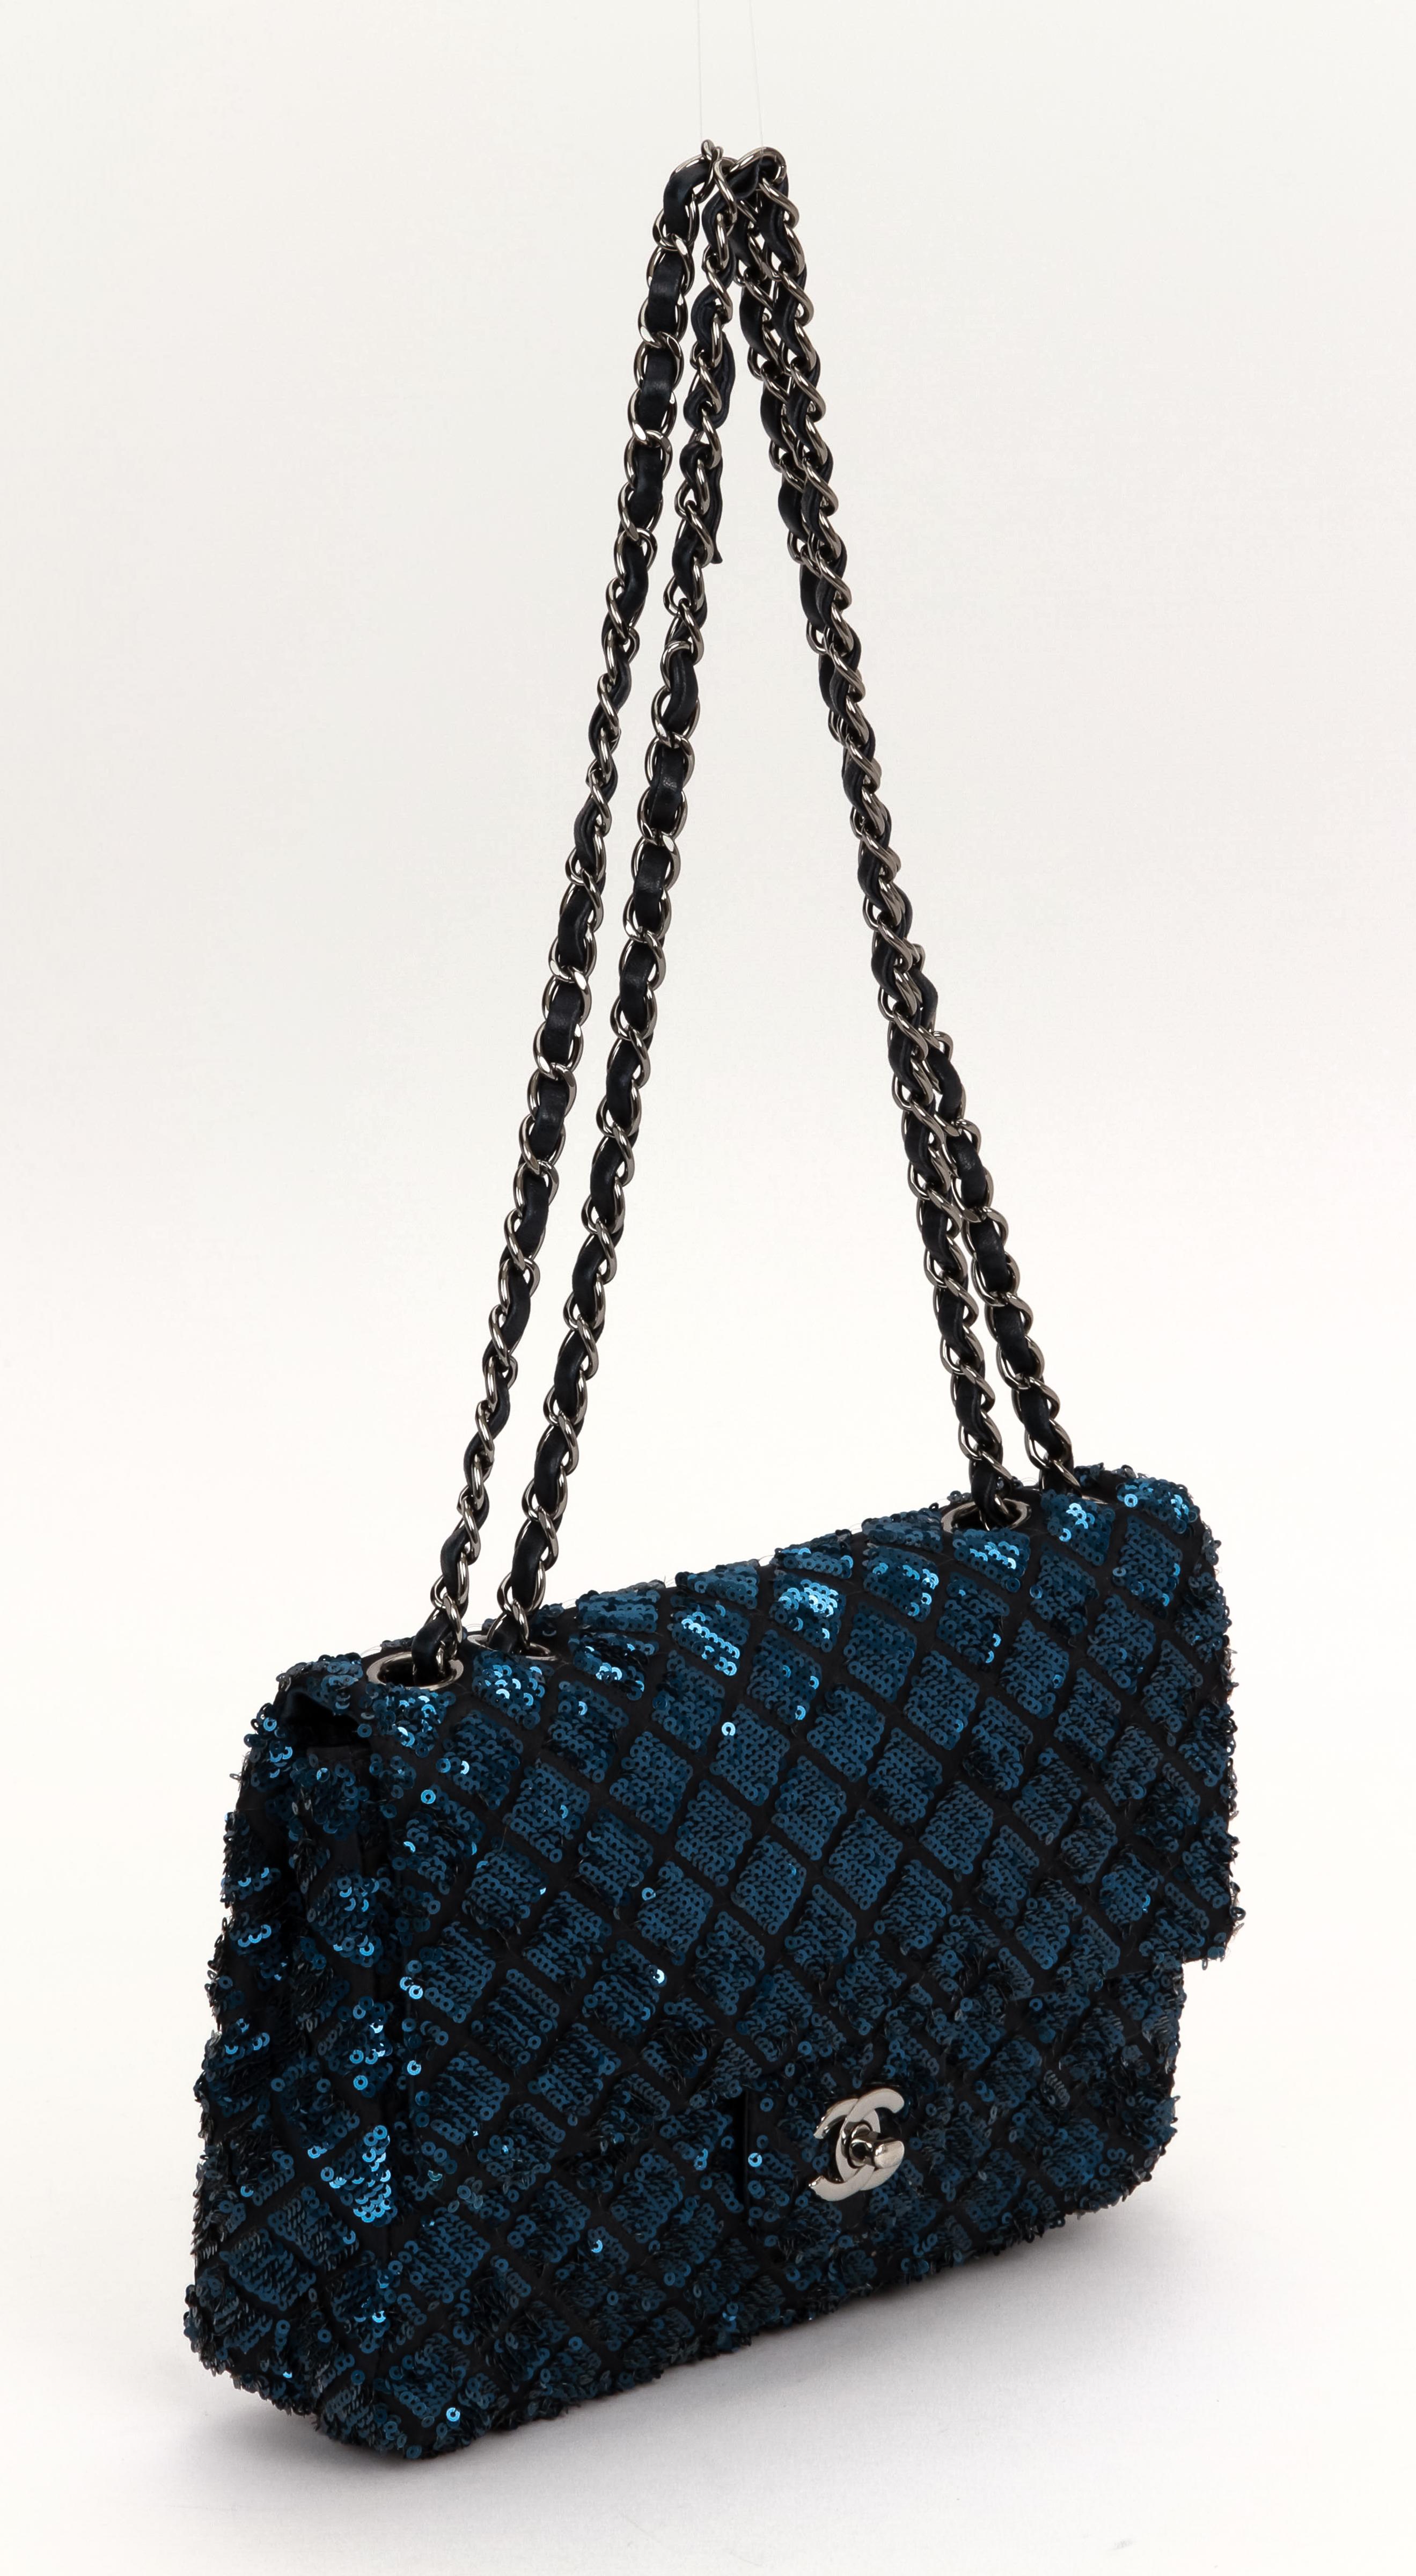 Chanel quilted black silk and blue sequins single-flap evening bag with silvertone hardware. Can also be worn as a crossbody. Leather interior. Shoulder drop, 12